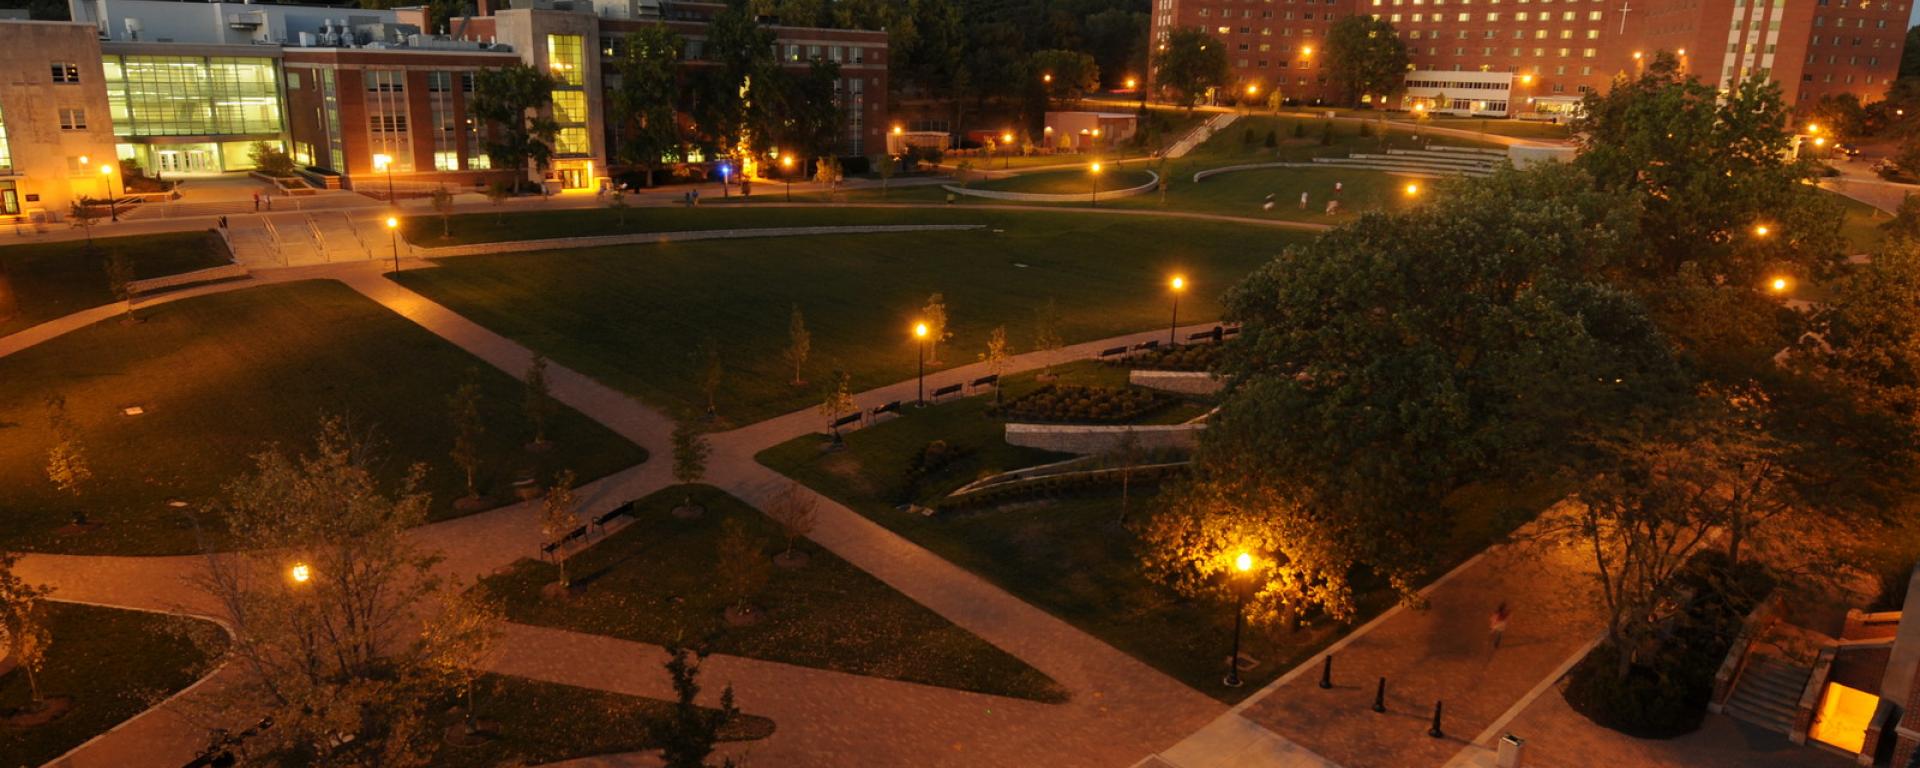 open lawn and walkways at night